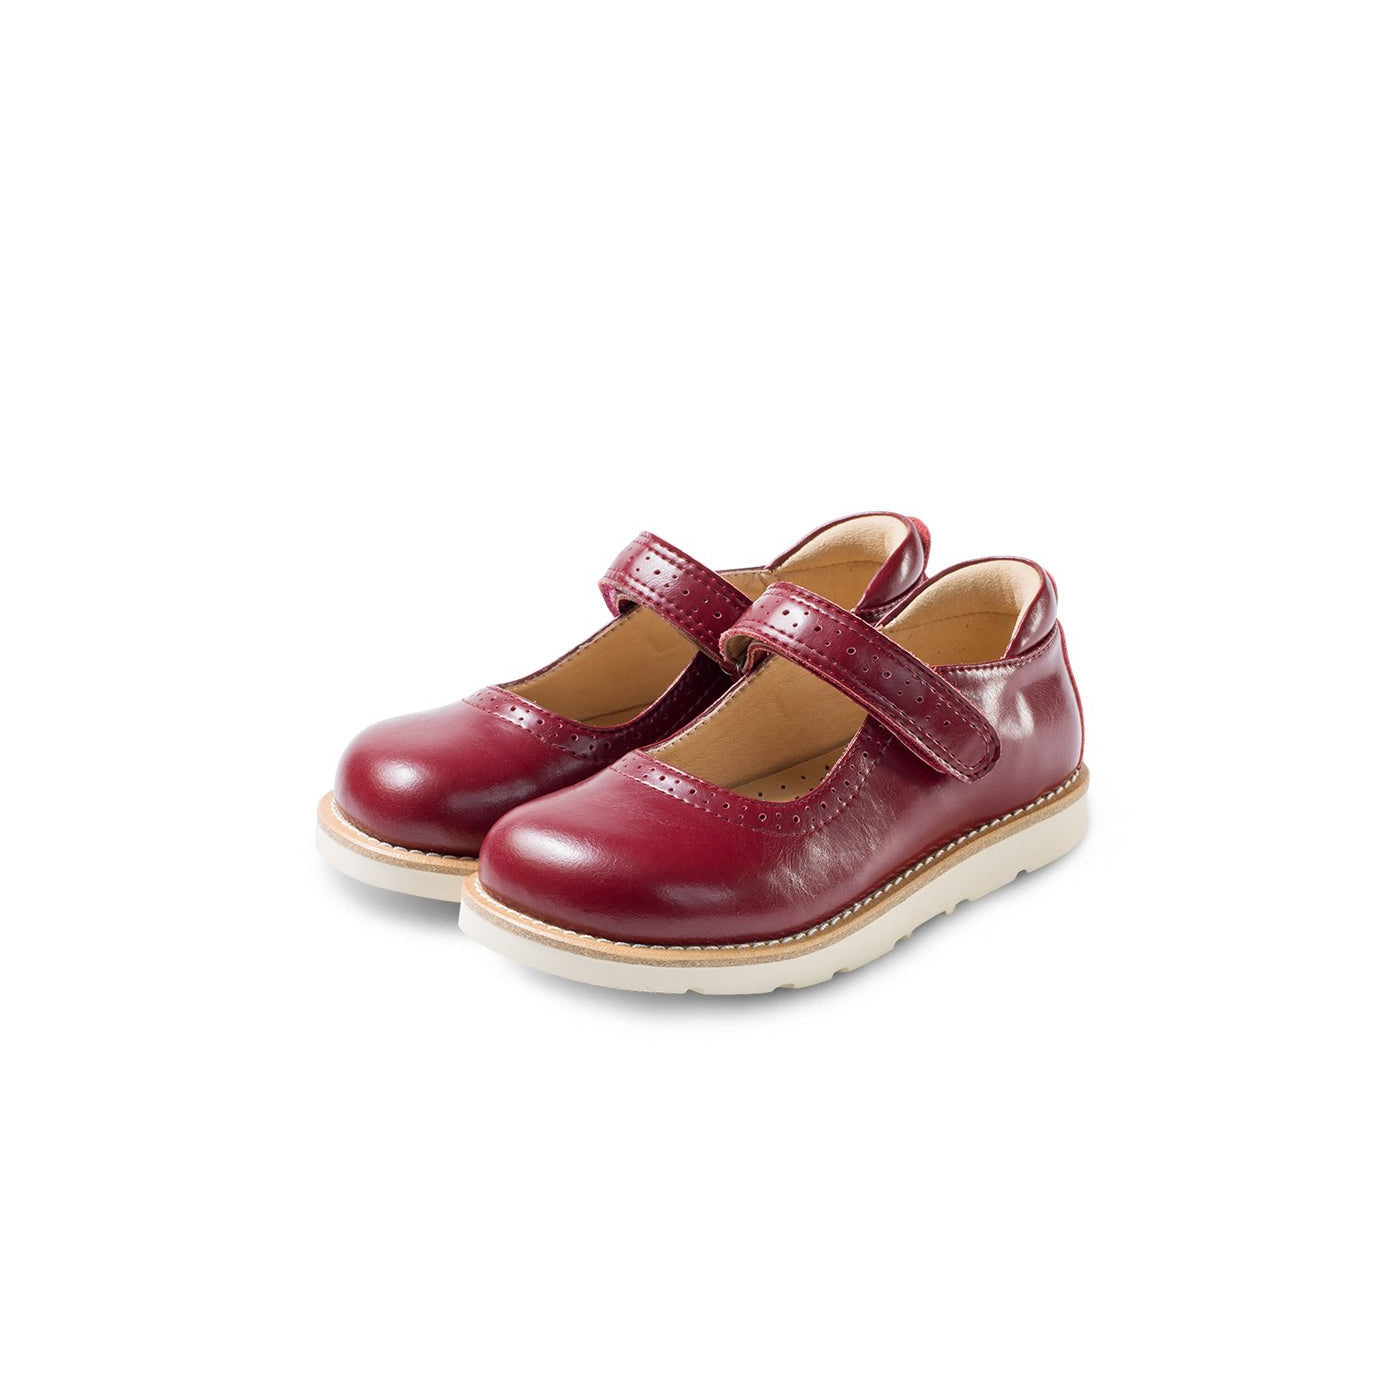 Easy Day Girl Red Soft Sole Mary Jane Shoes - 0cm